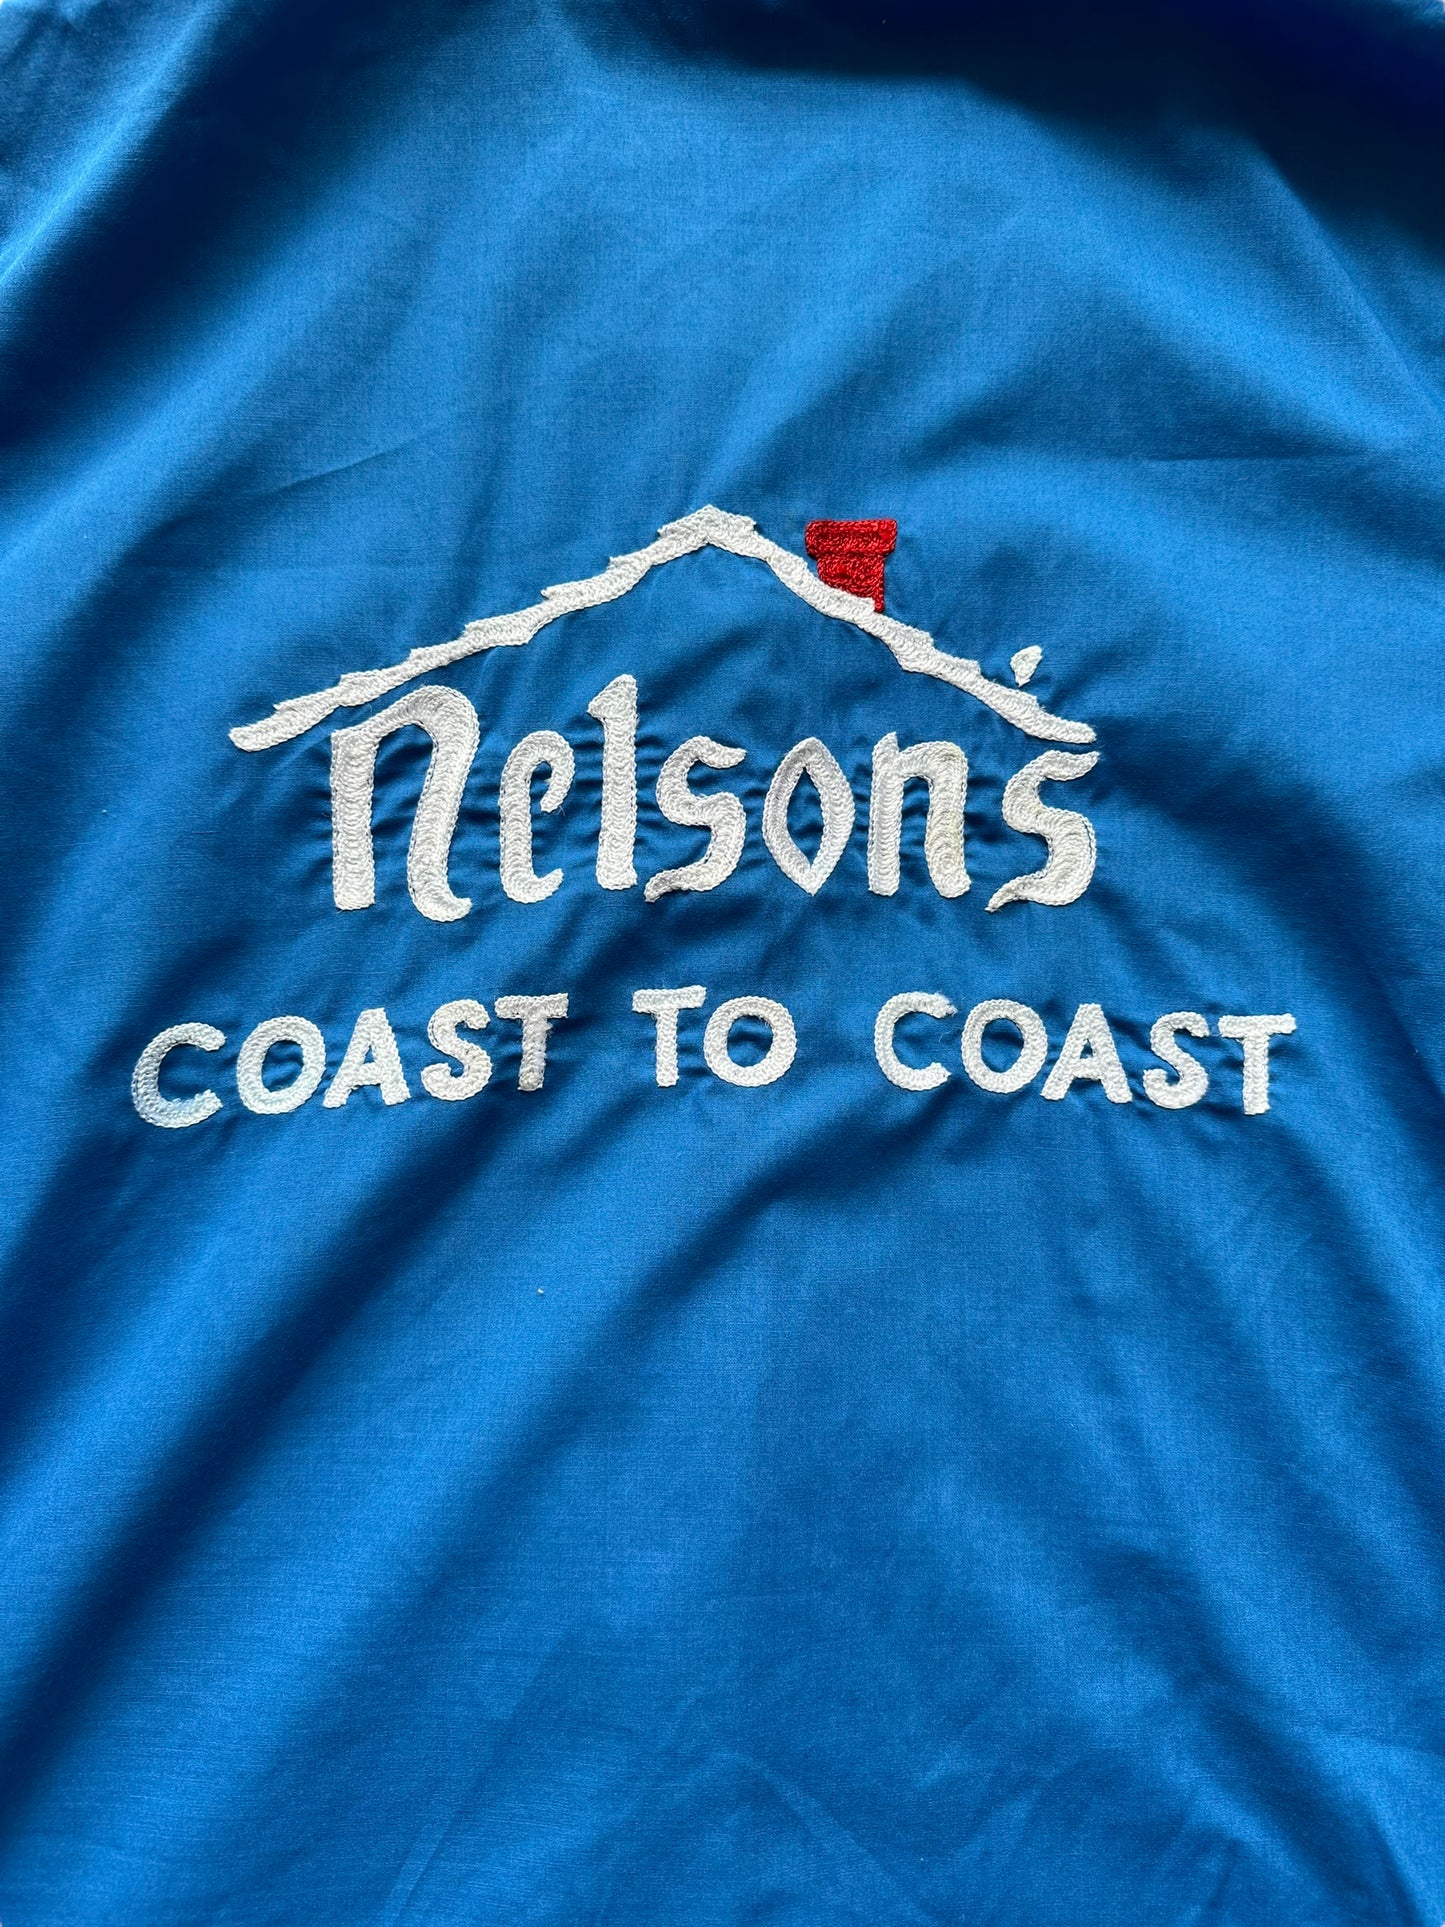 Back logo of Vintage "Nelson's Coast to Coast" Chainstitched Bowling Shirt SZ S | Vintage Bowling Shirt Seattle | Barn Owl Vintage Seattle